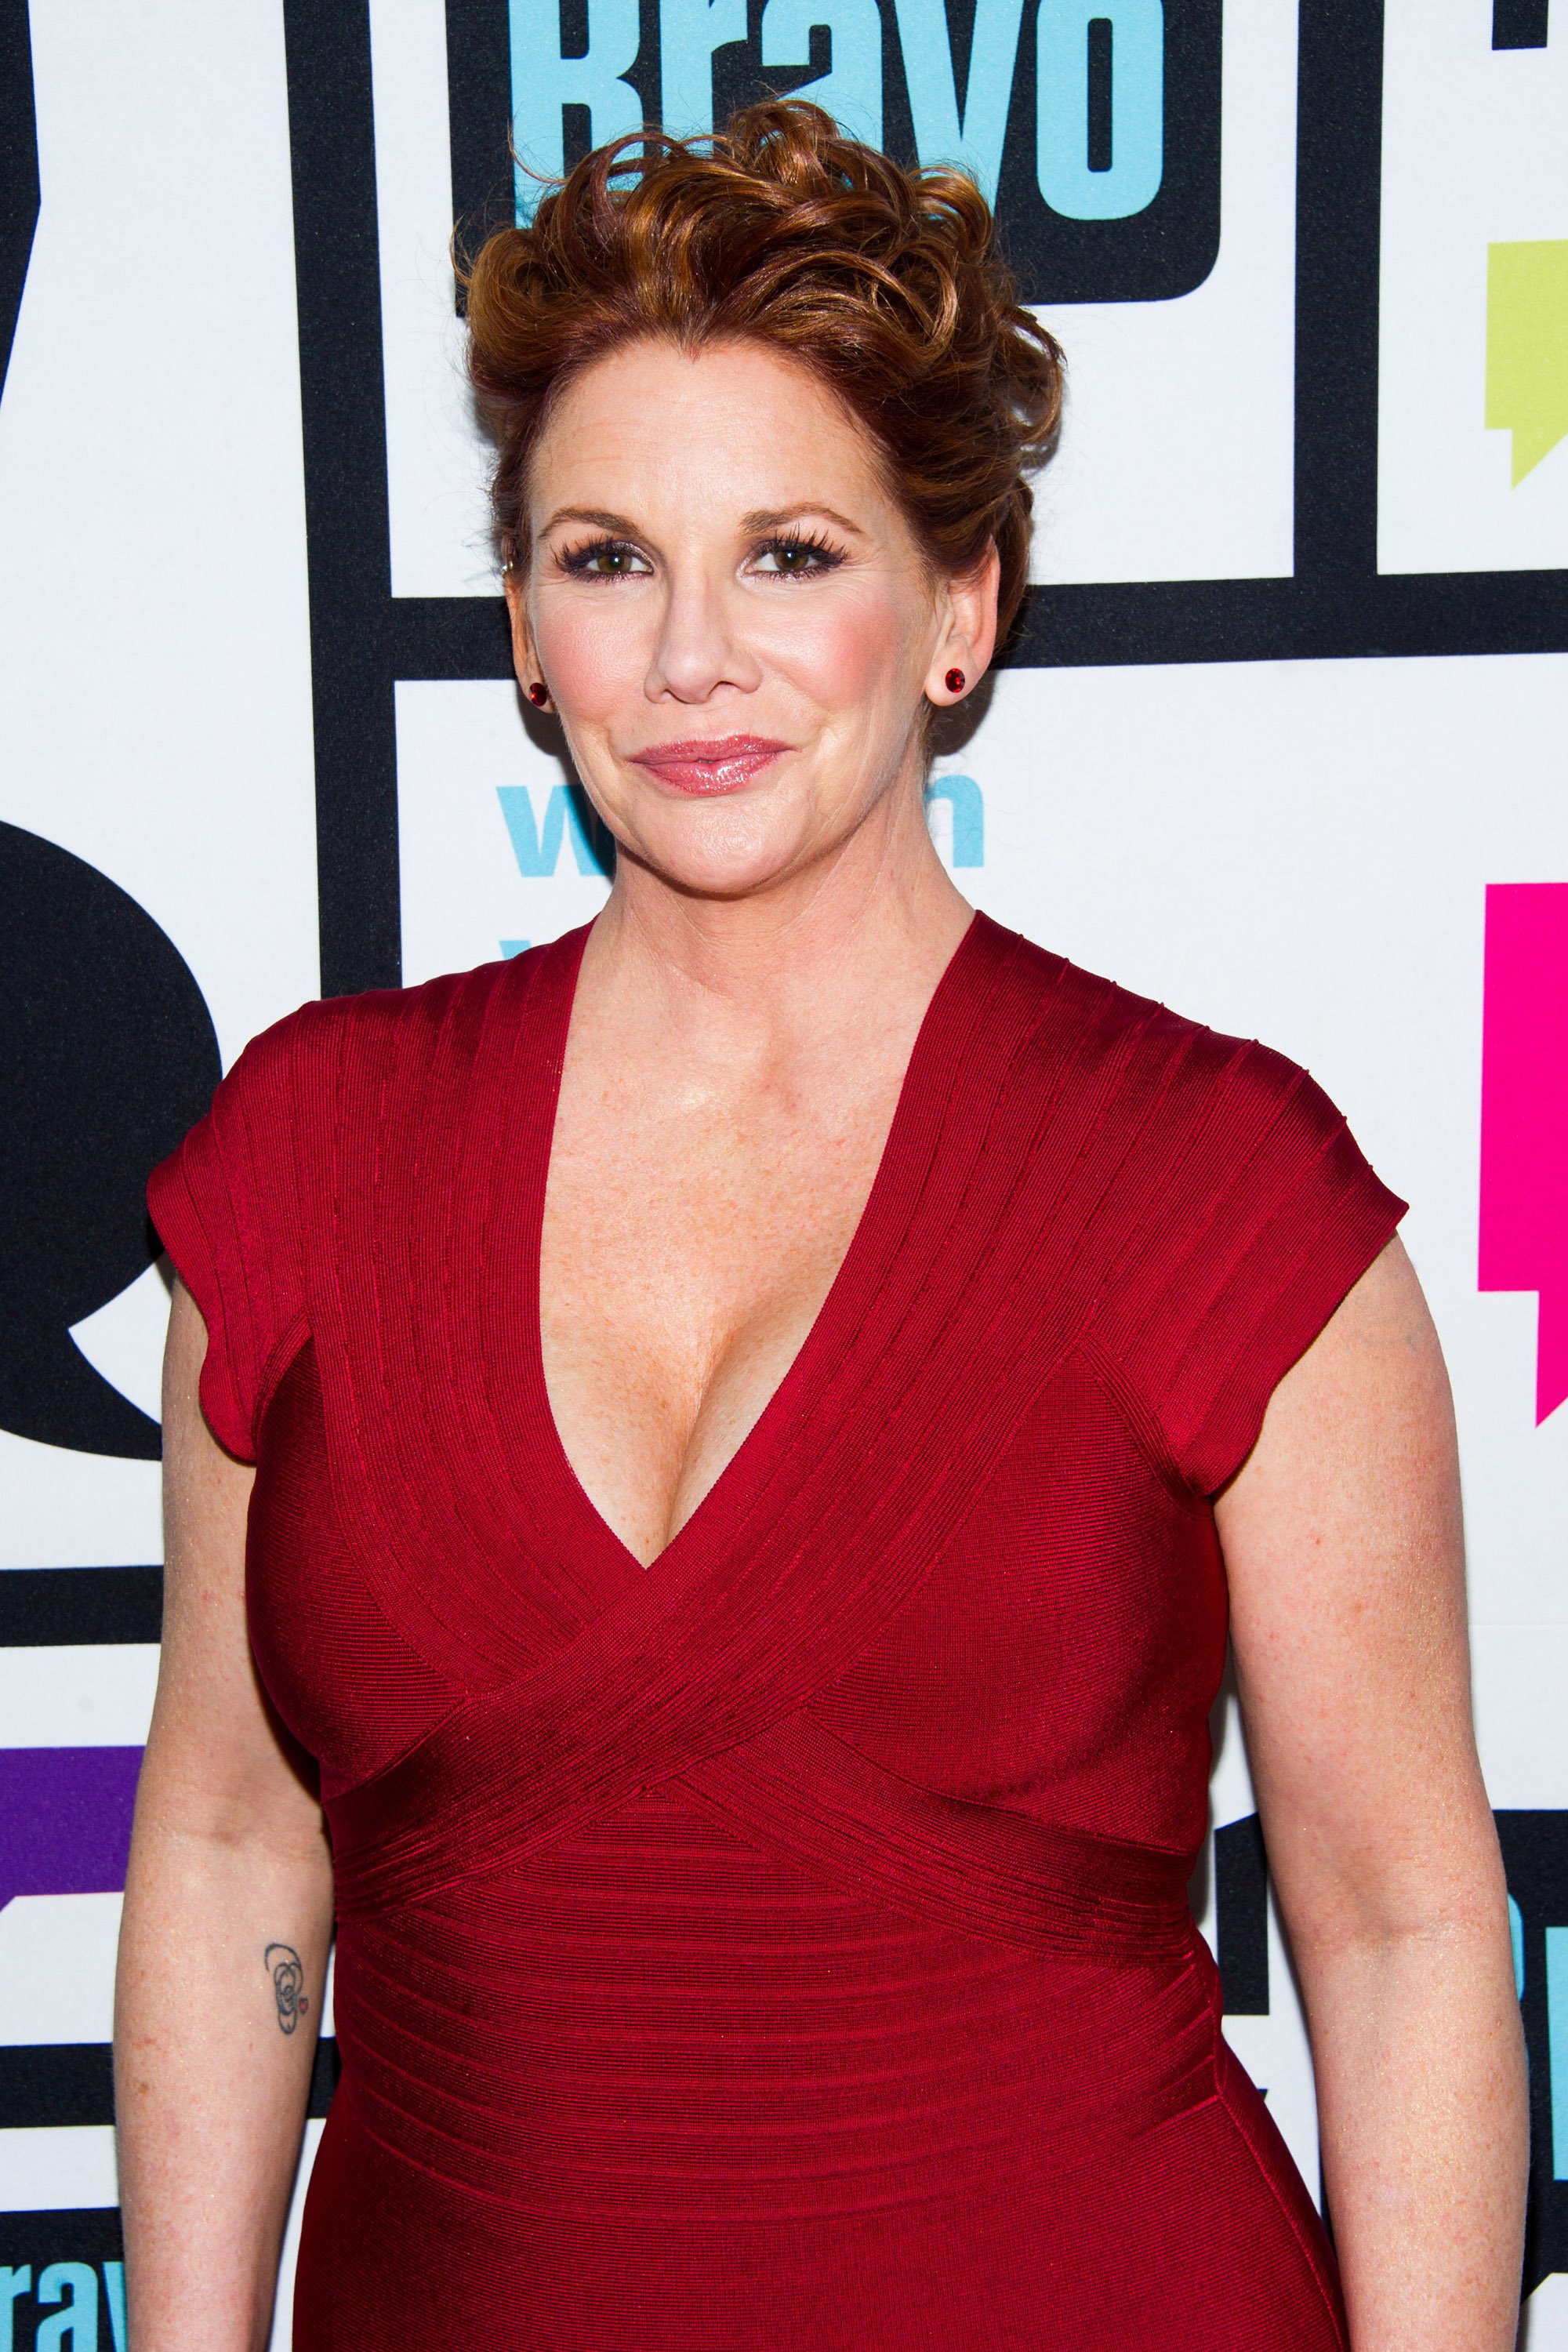 Melissa Gilbert on an episode of WATCH WHAT HAPPENS LIVE which aired on January 22, 2014 | Source: Getty Images